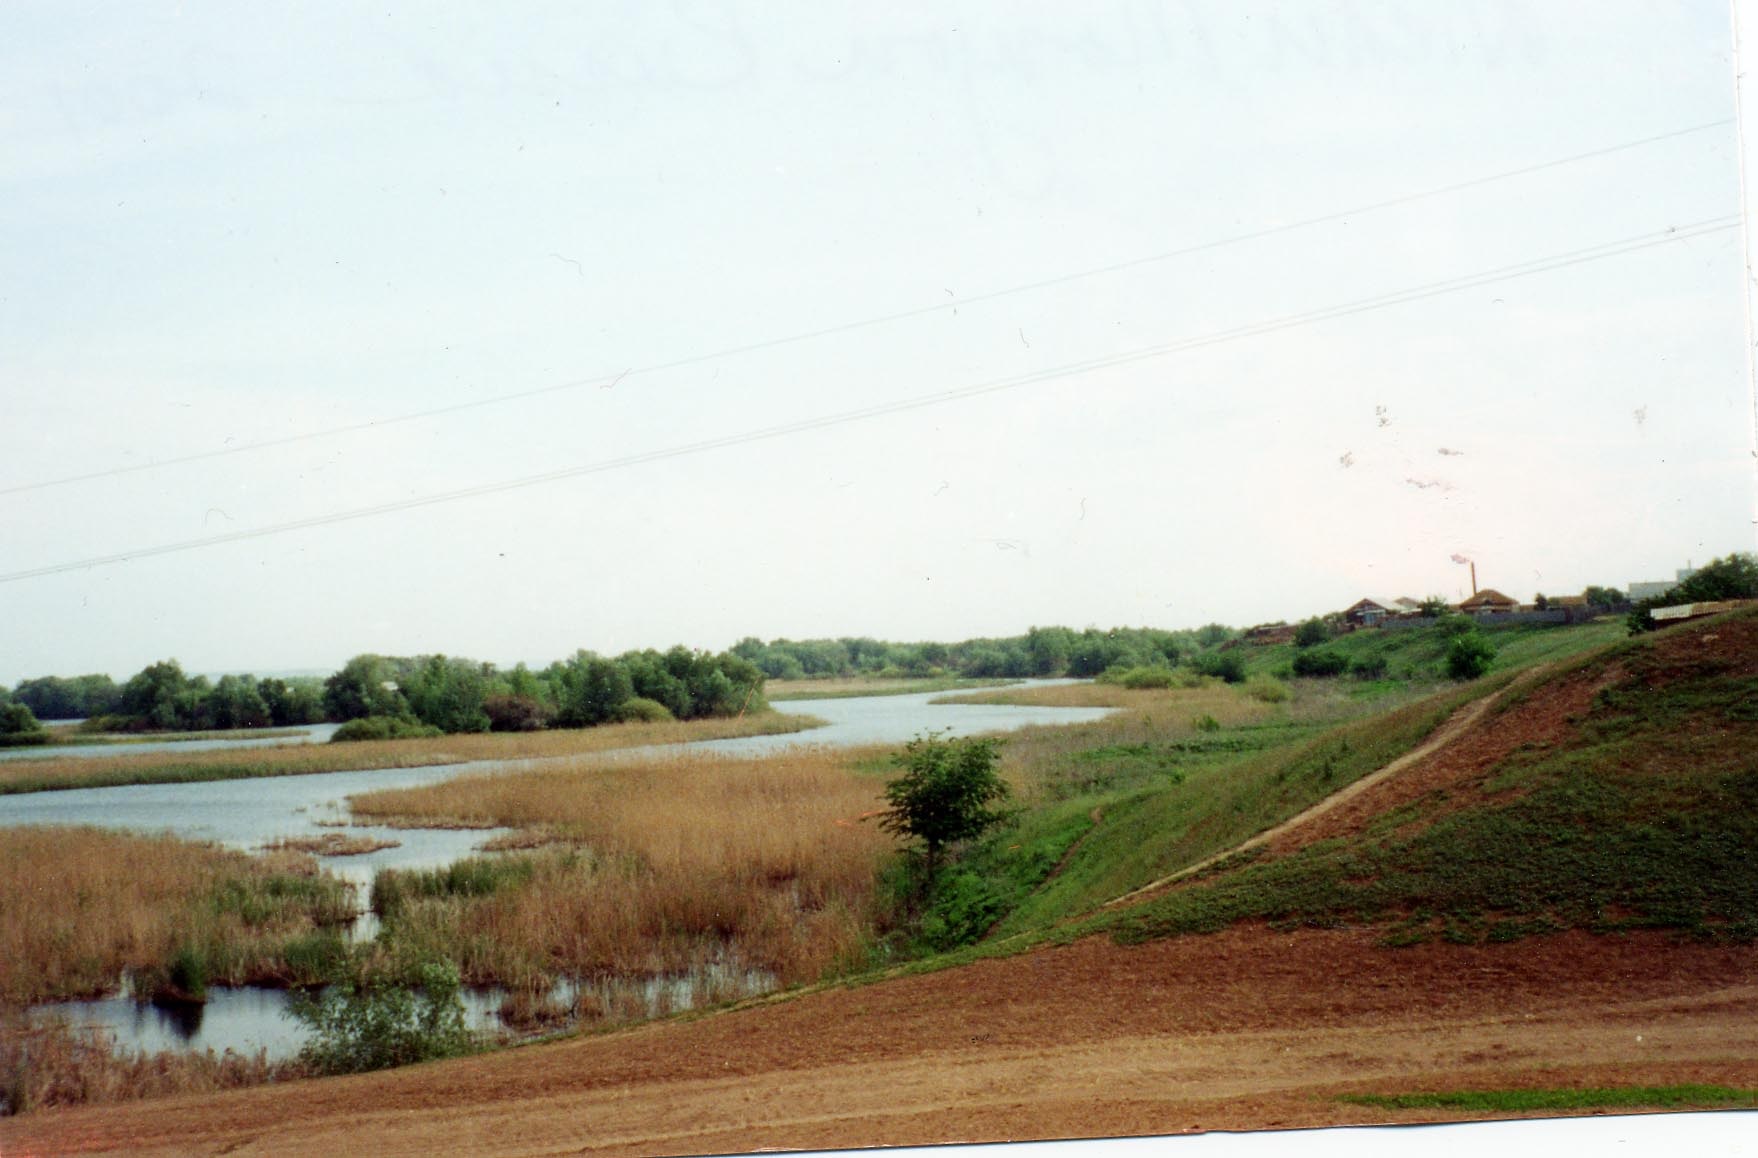 River below Nieder-Monjou which is on the bank to the right. Courtesy of Tim Weeder (2001).